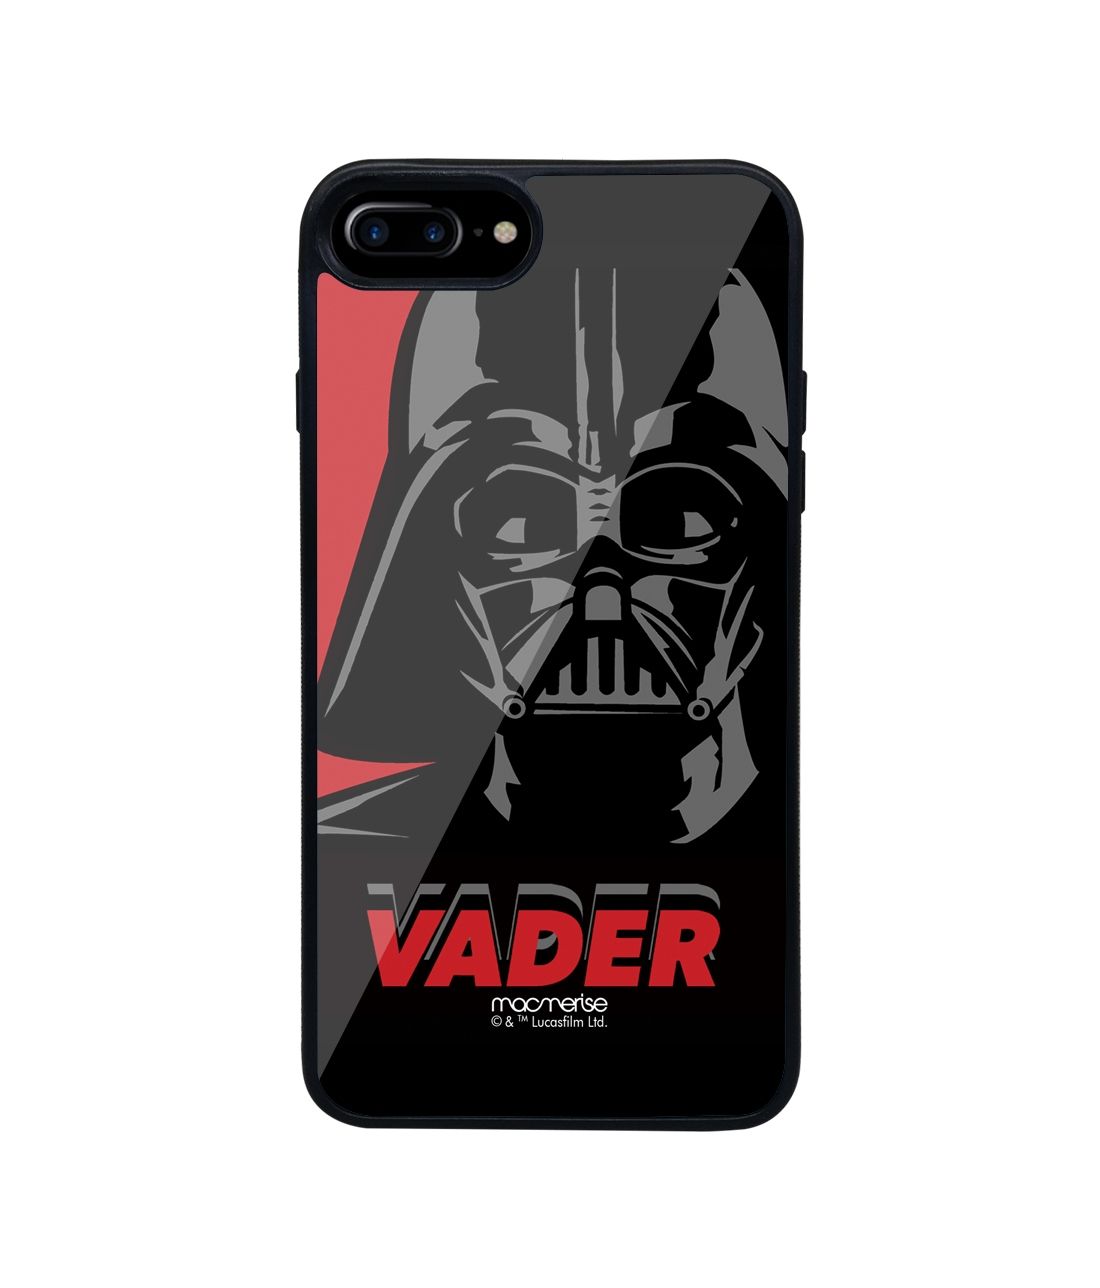 Vader - Glass Phone Case for iPhone 7 Plus